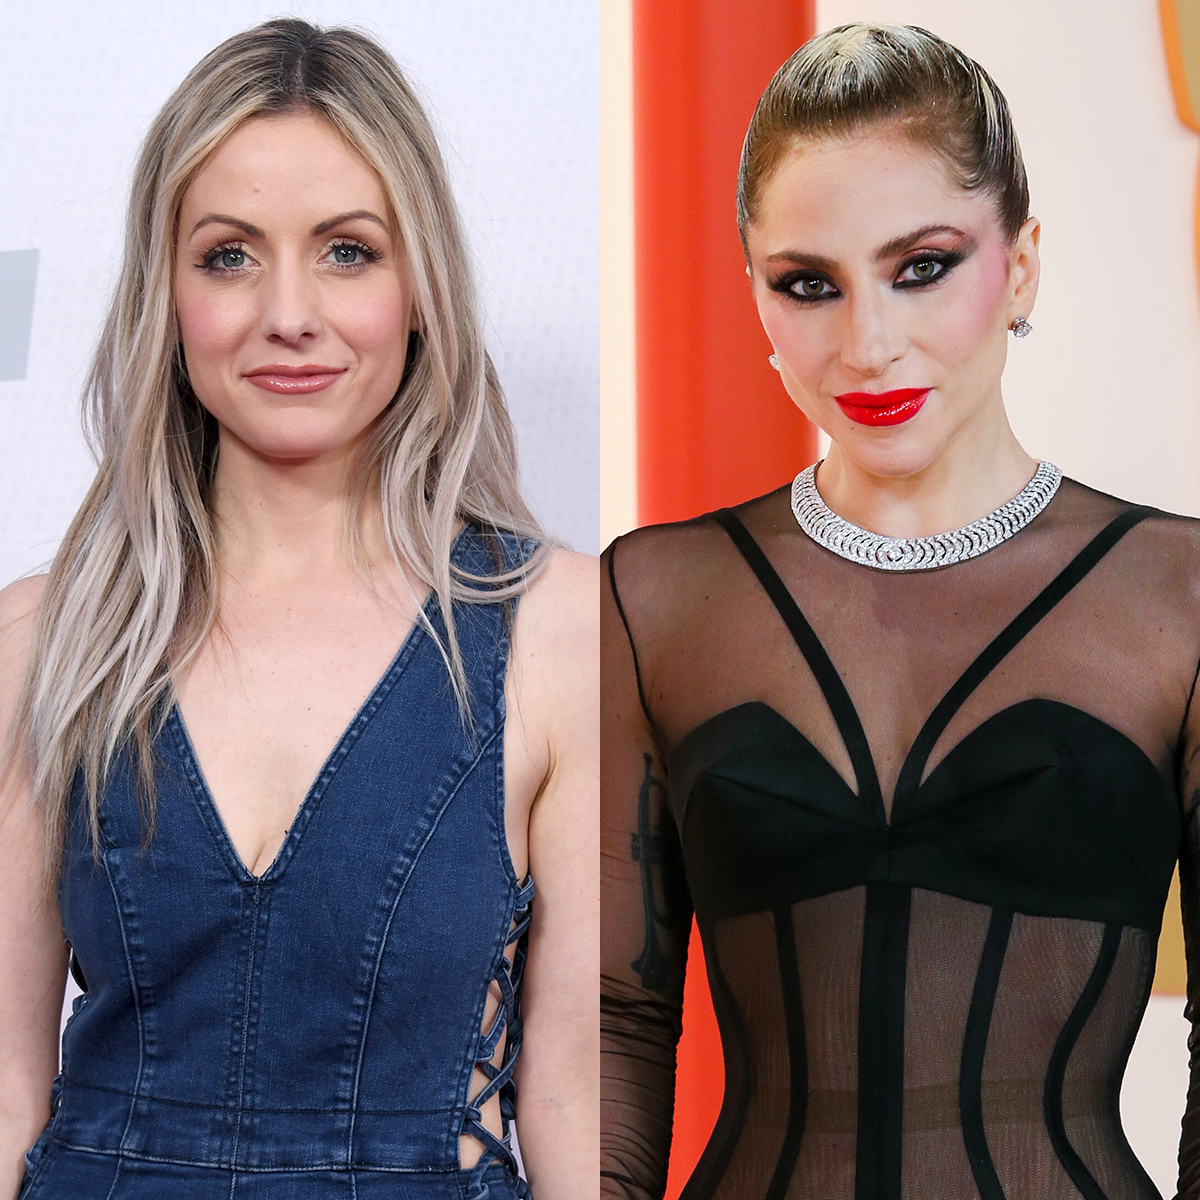 Fashionable streaming: The love affair between actresses and